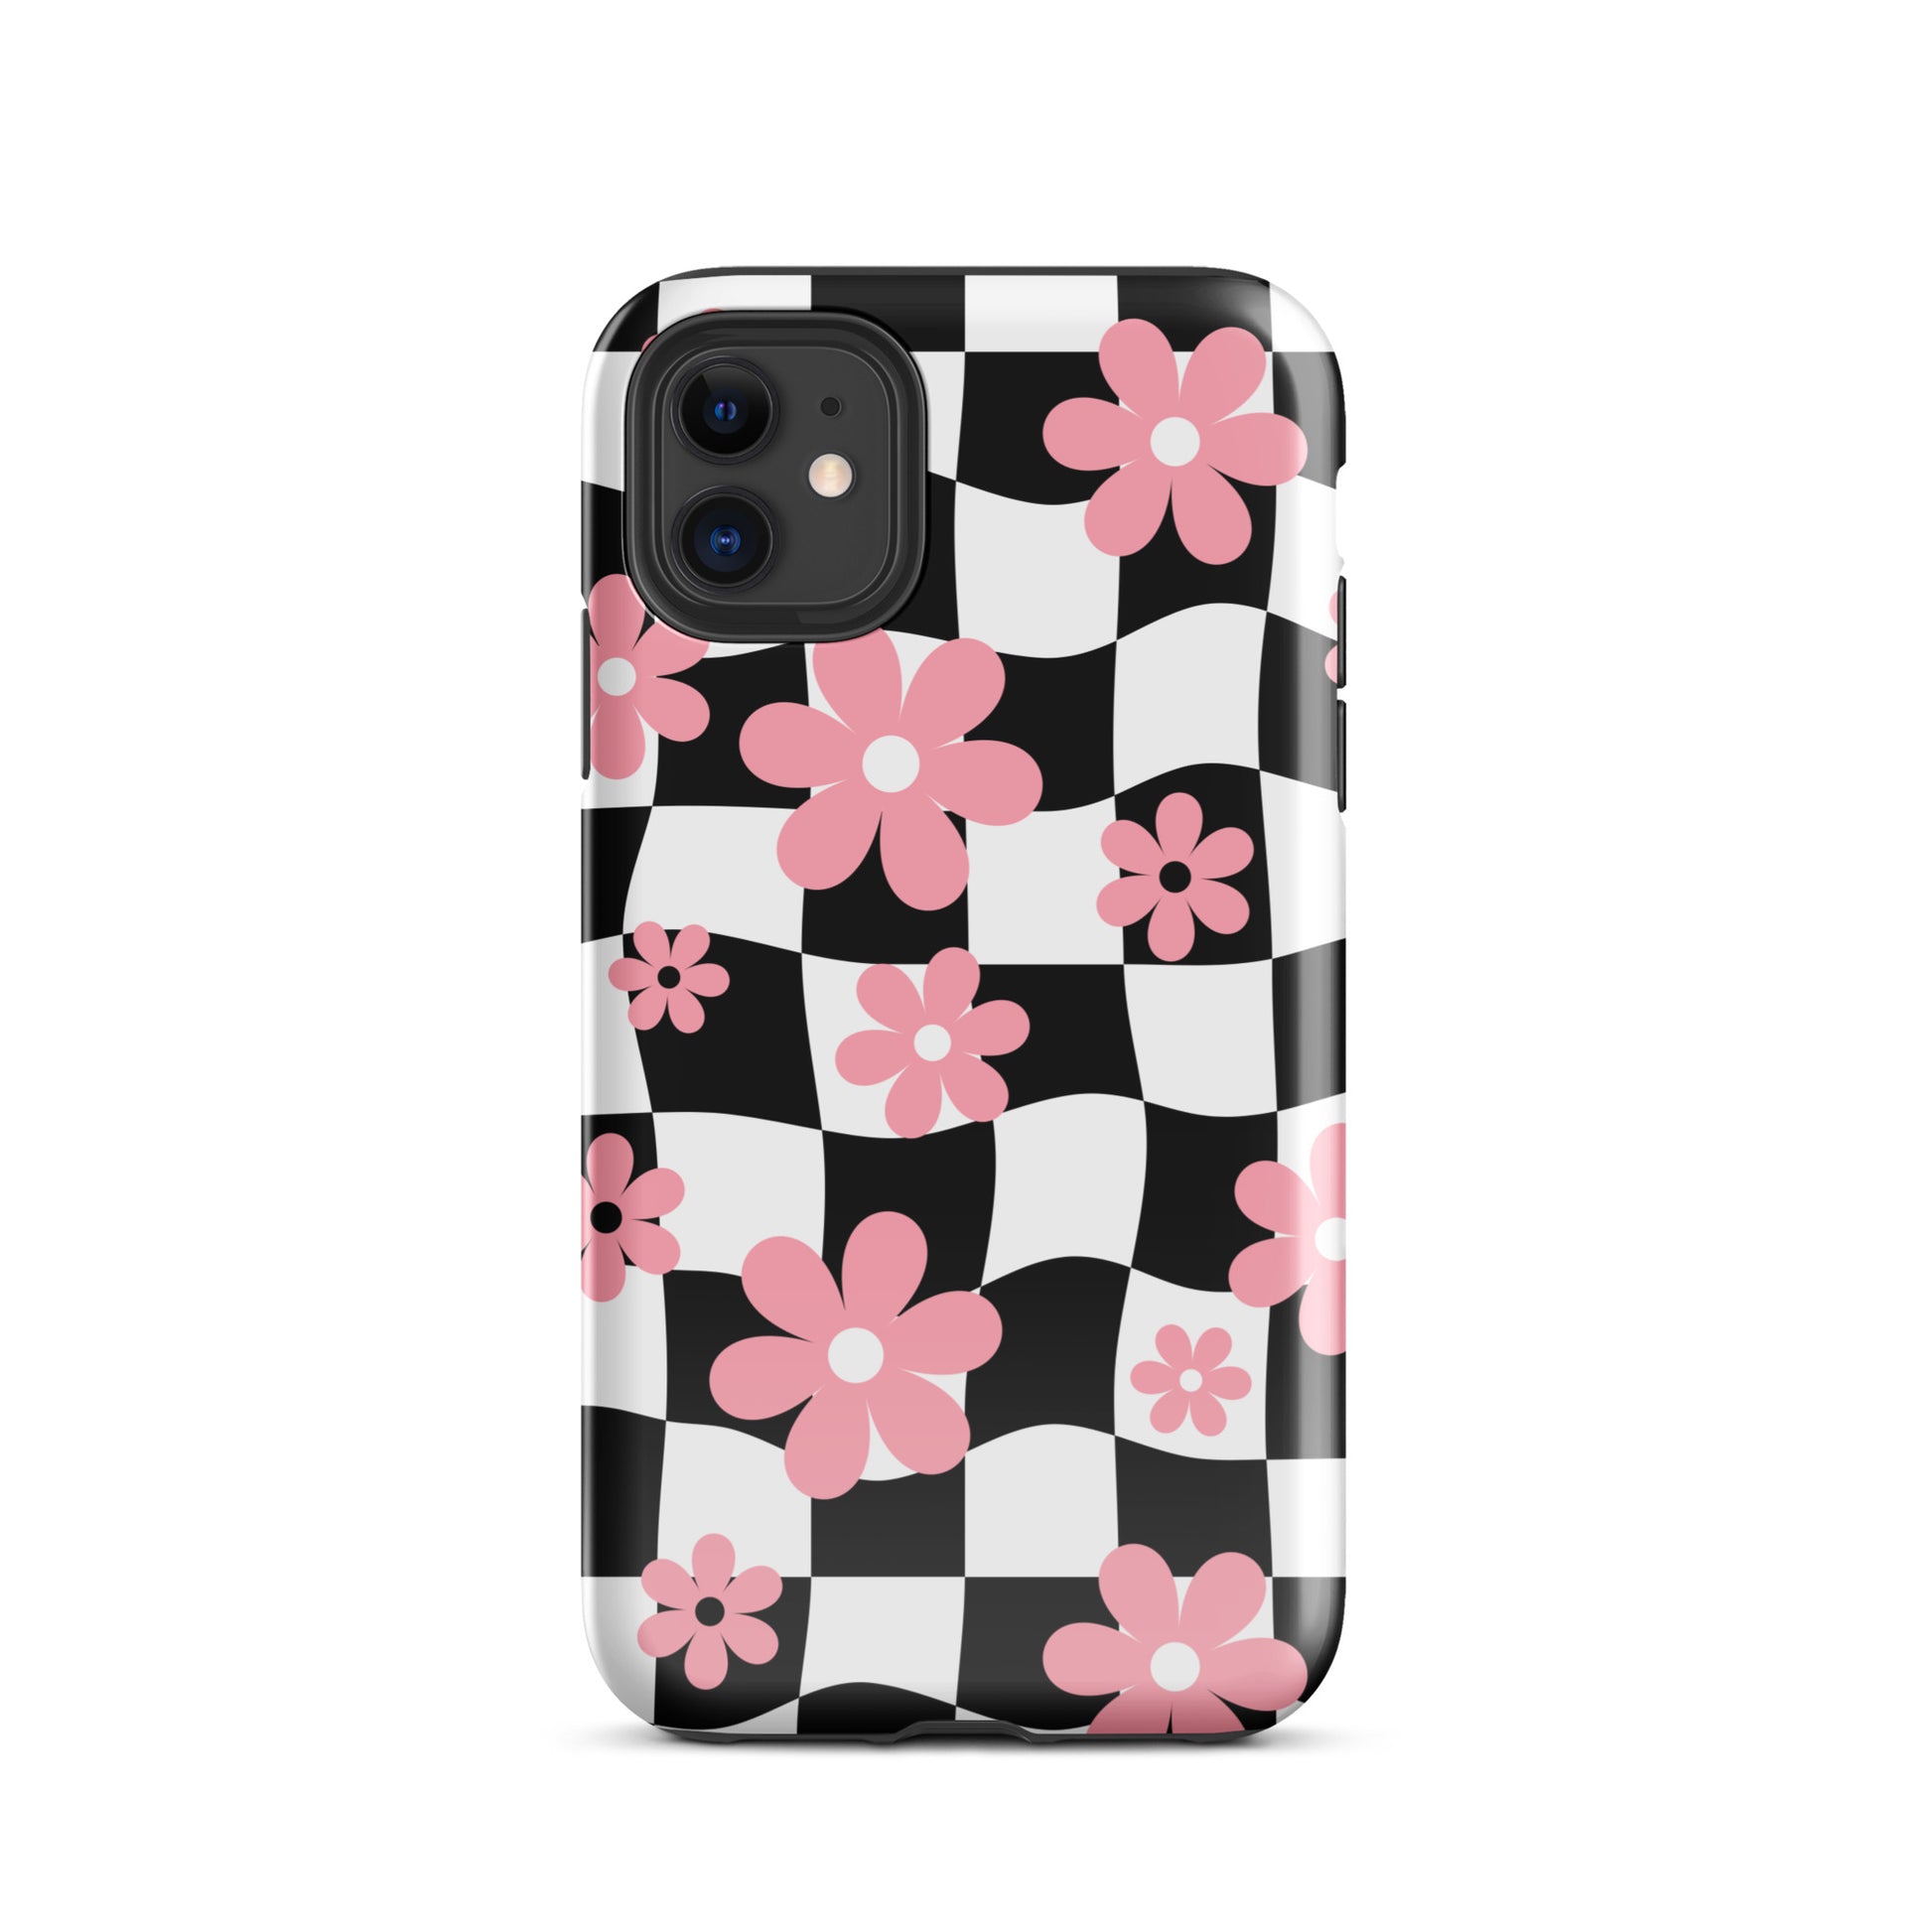 Floral Wavy Checkered iPhone Case iPhone 11 Glossy